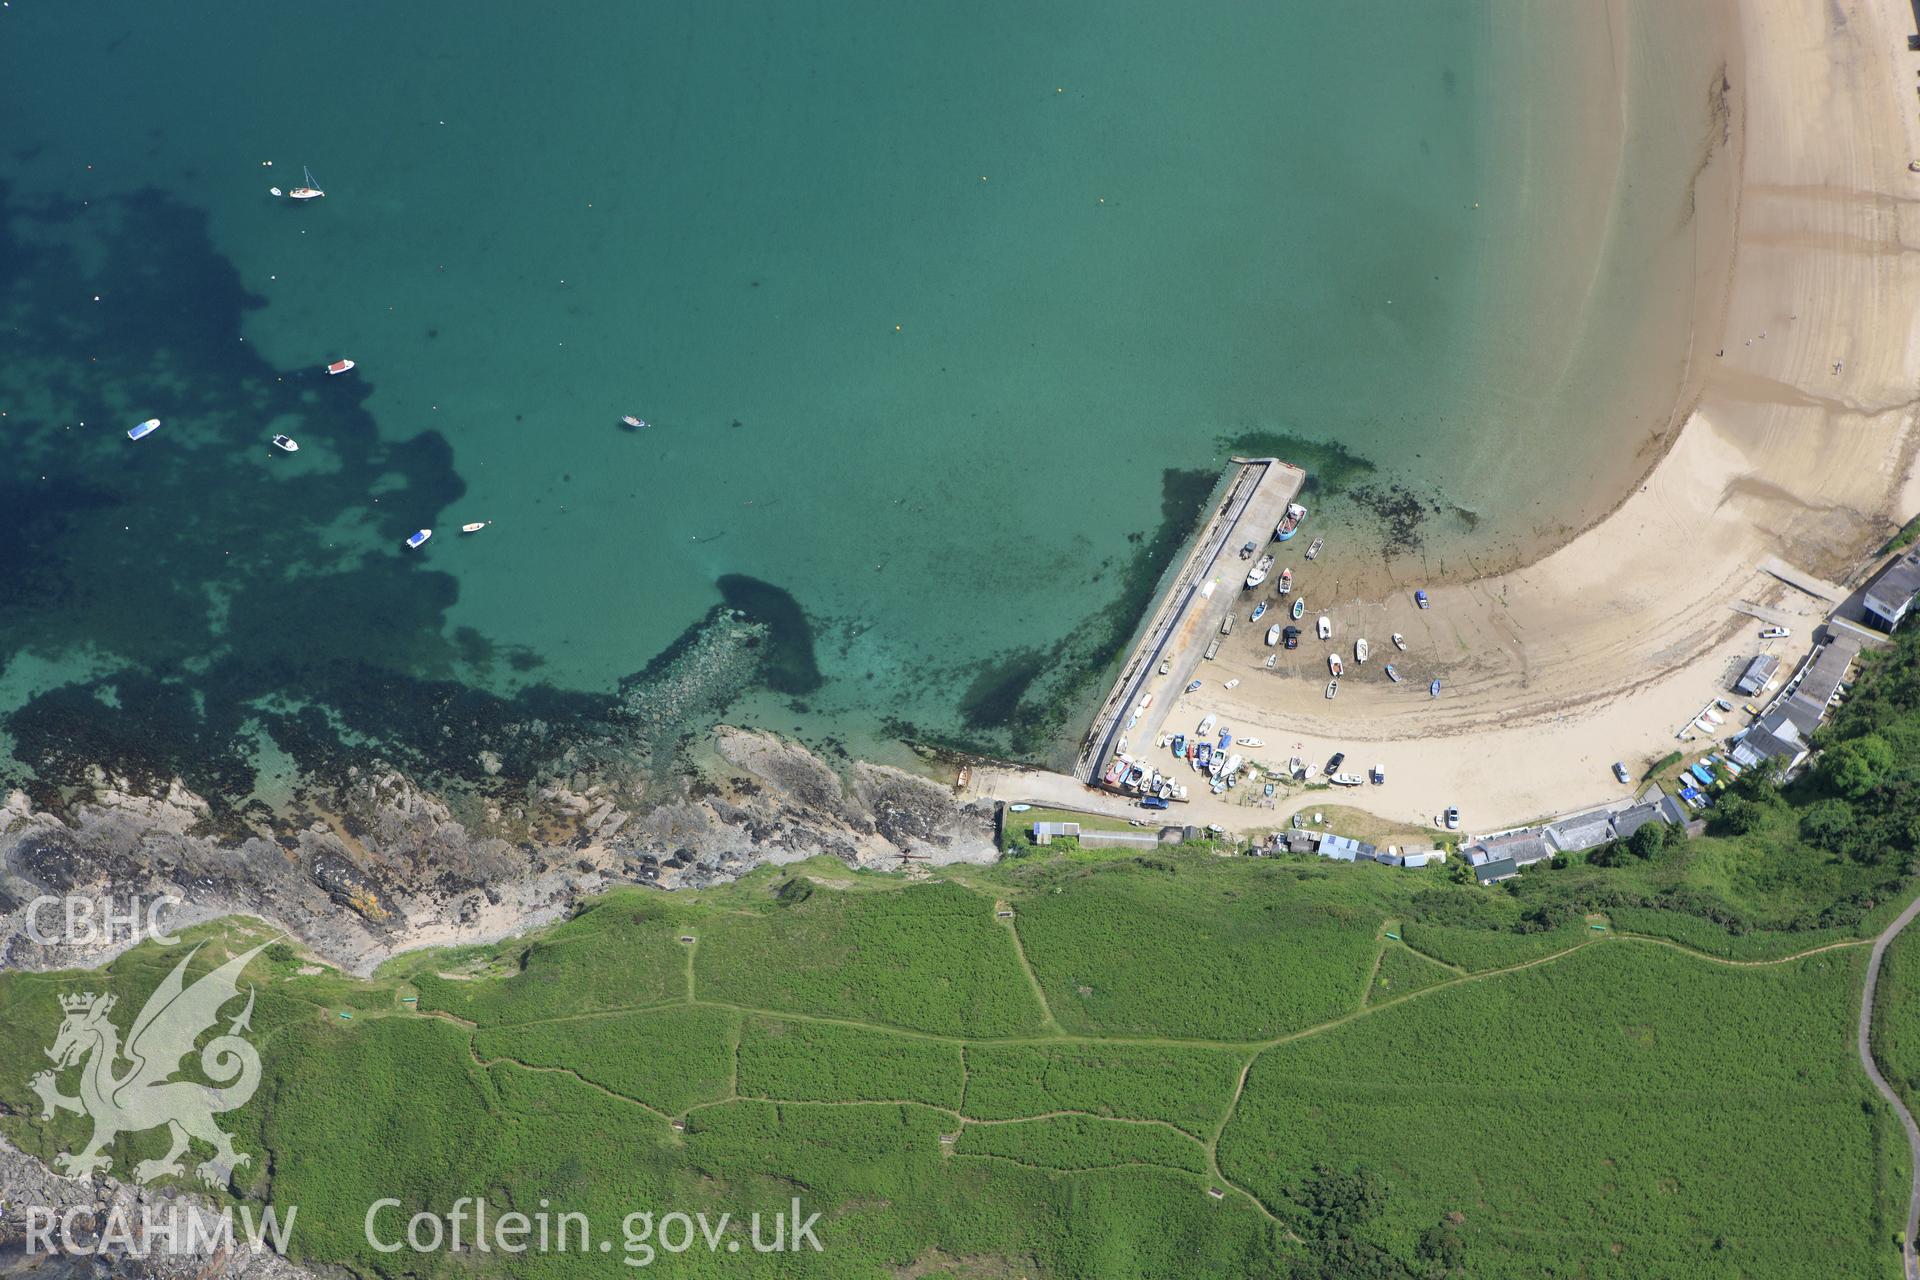 RCAHMW colour oblique aerial photograph of Penrhyn Nefyn Harbour and Old Jetty. Taken on 16 June 2009 by Toby Driver